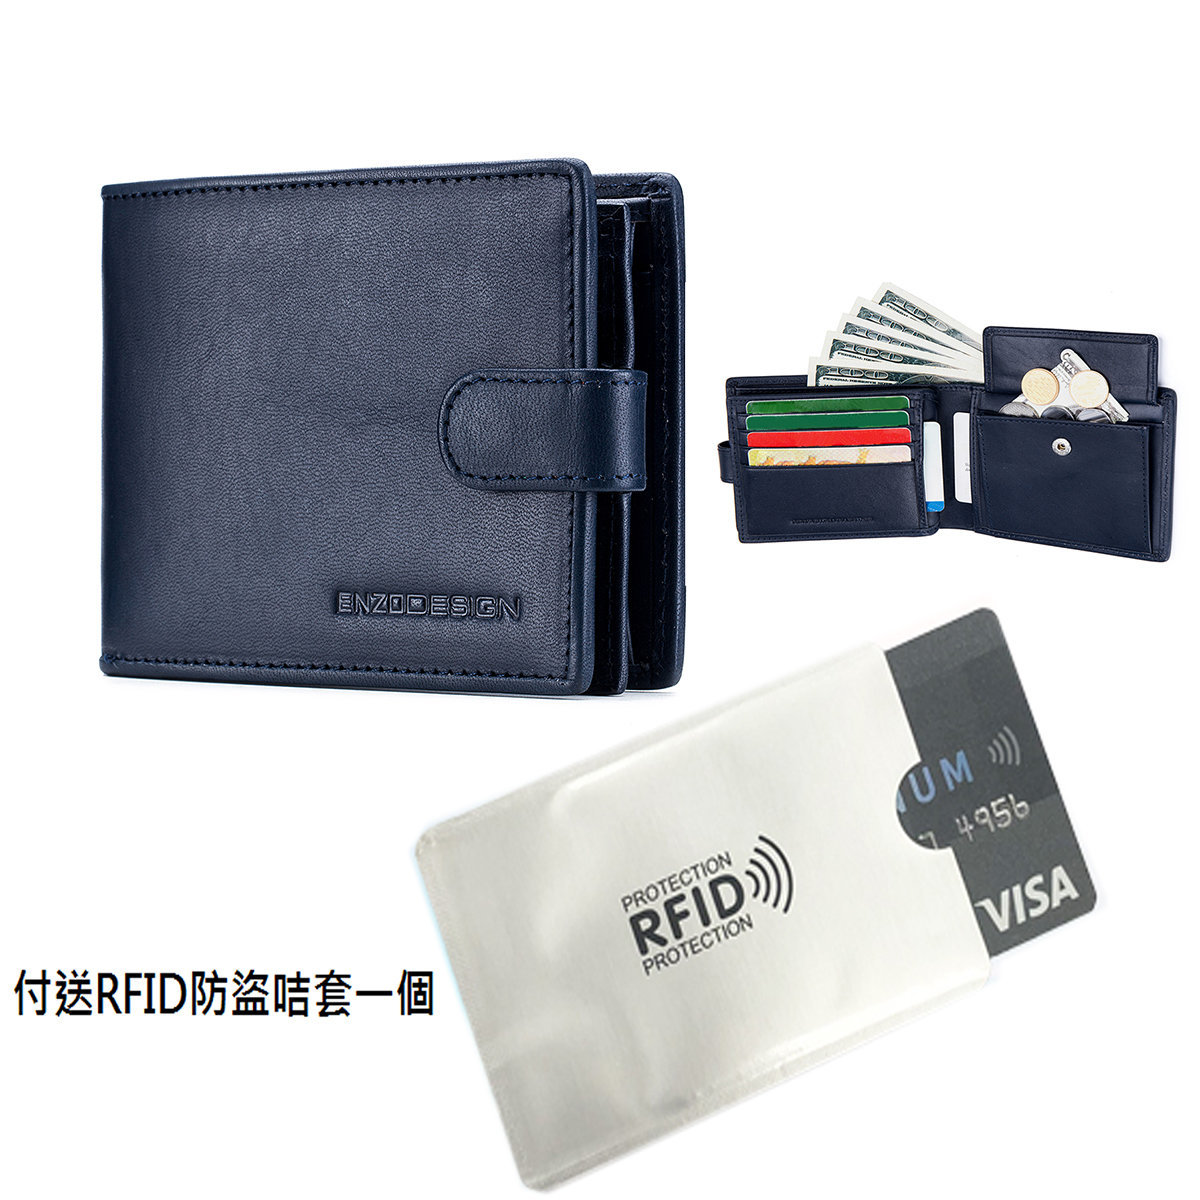 ENZODESIGN Italian Leather Made Tab Wallet with Coin Pocket